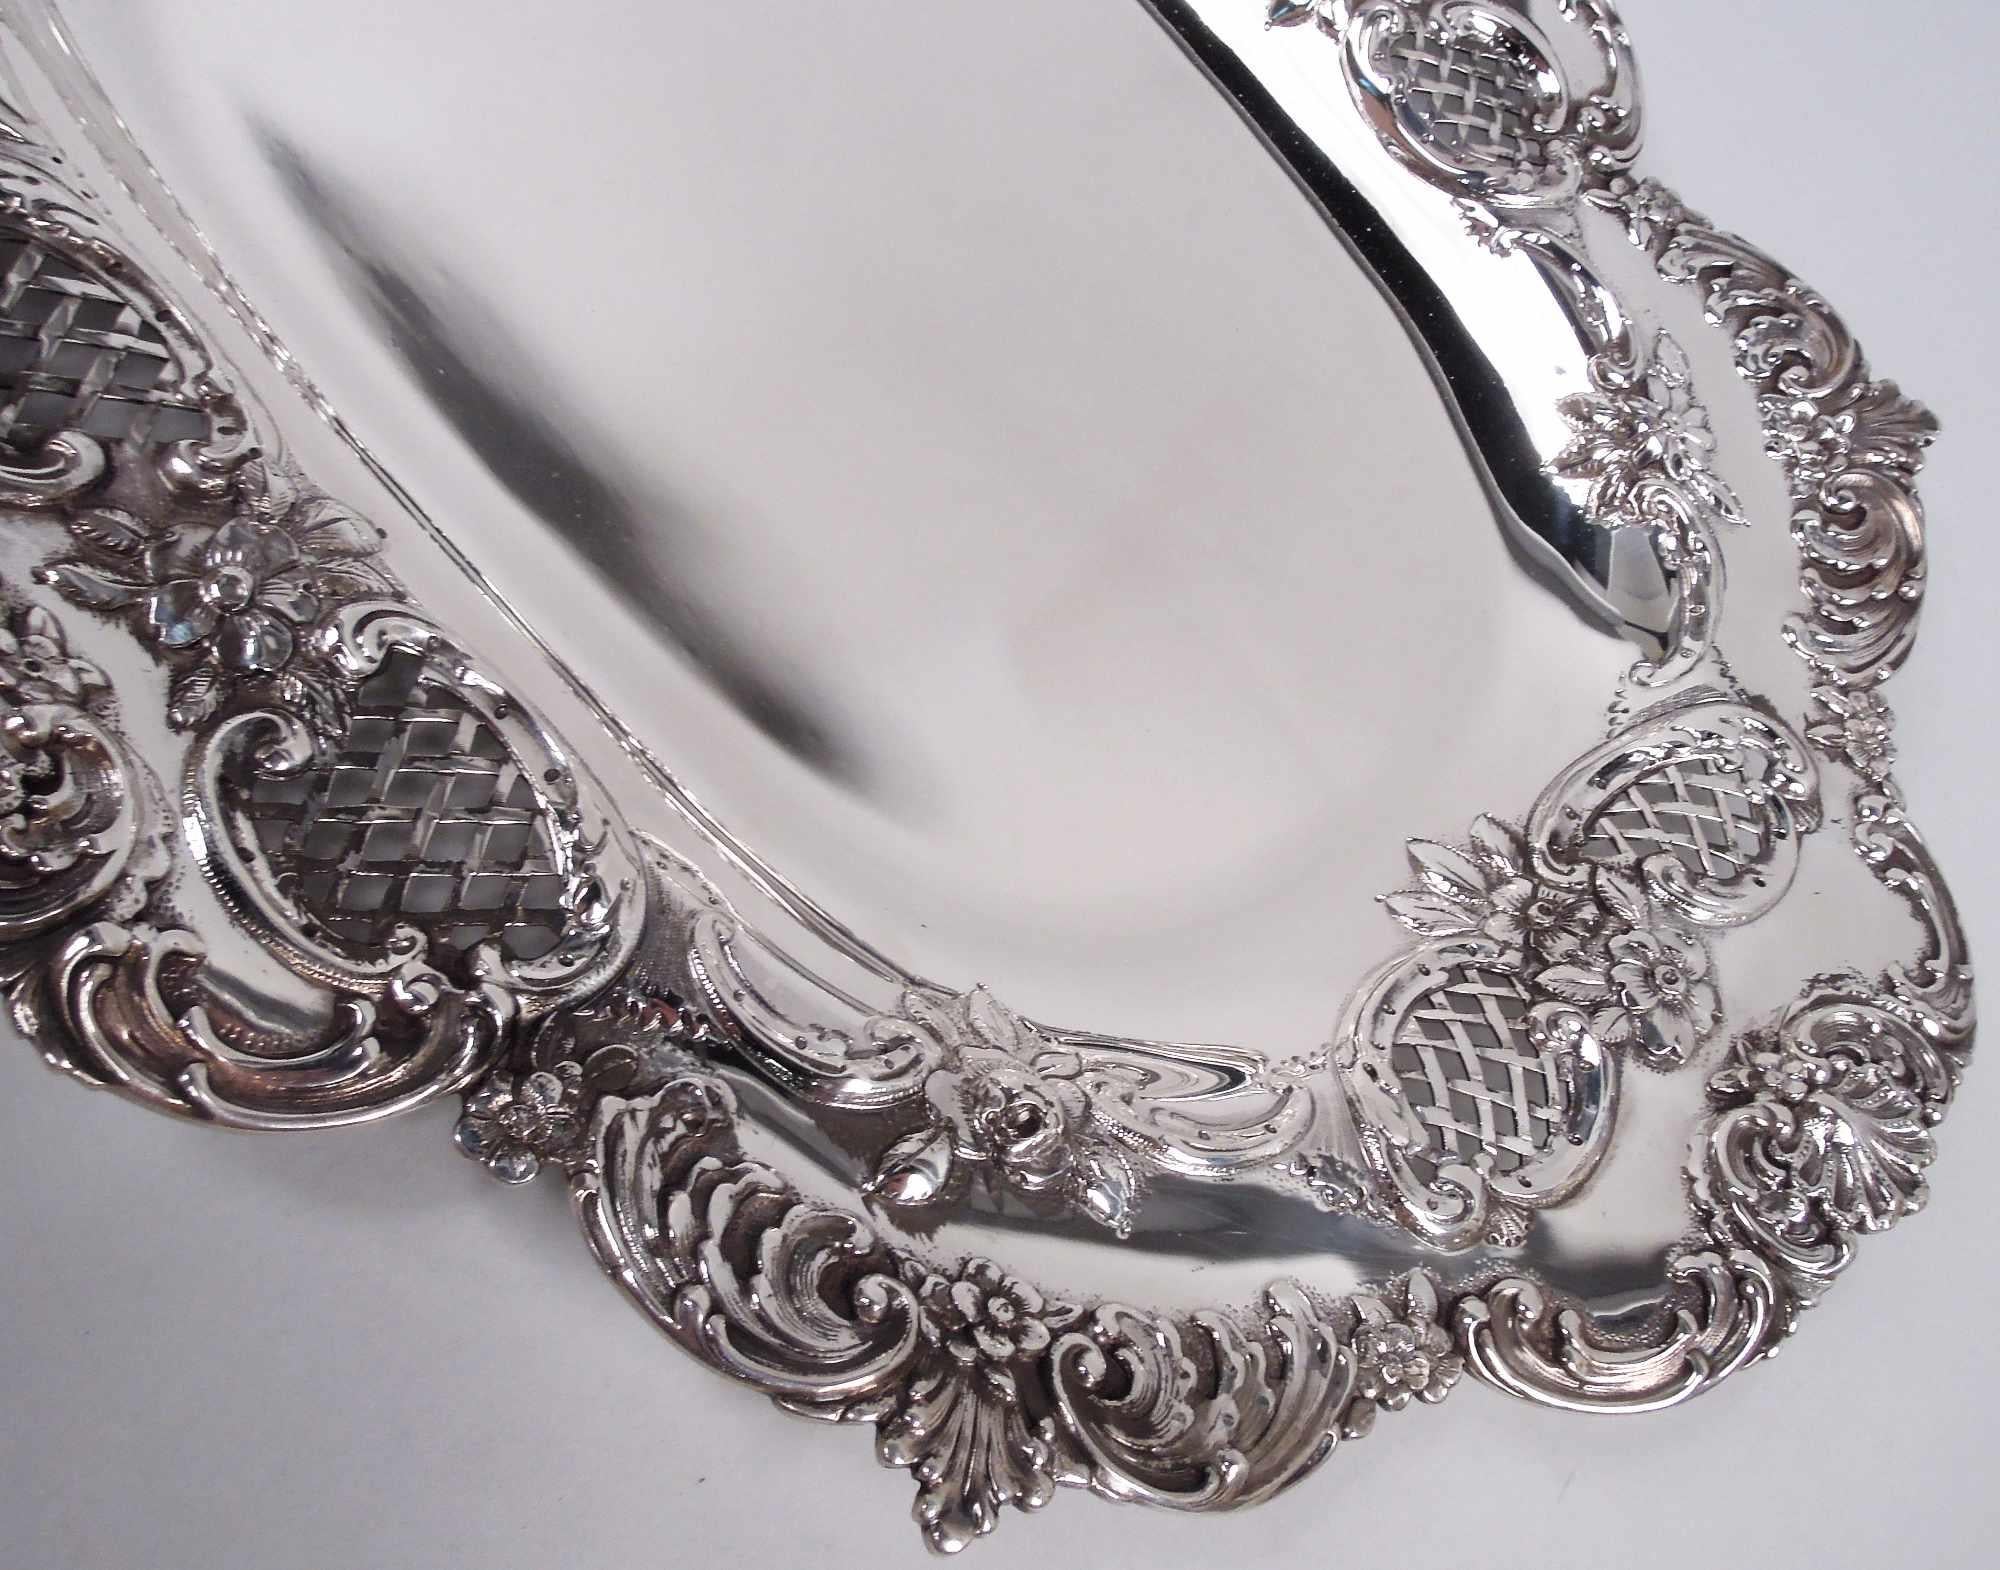 Victorian Classical sterling silver tray. Made by Tiffany & Co. in New York. Solid oval well with curved sides. Shoulder wide with chased flowers, scrolls, and open diaper in scrolled cartouches. Rim has applied leafing scrolls, flowerheads, and